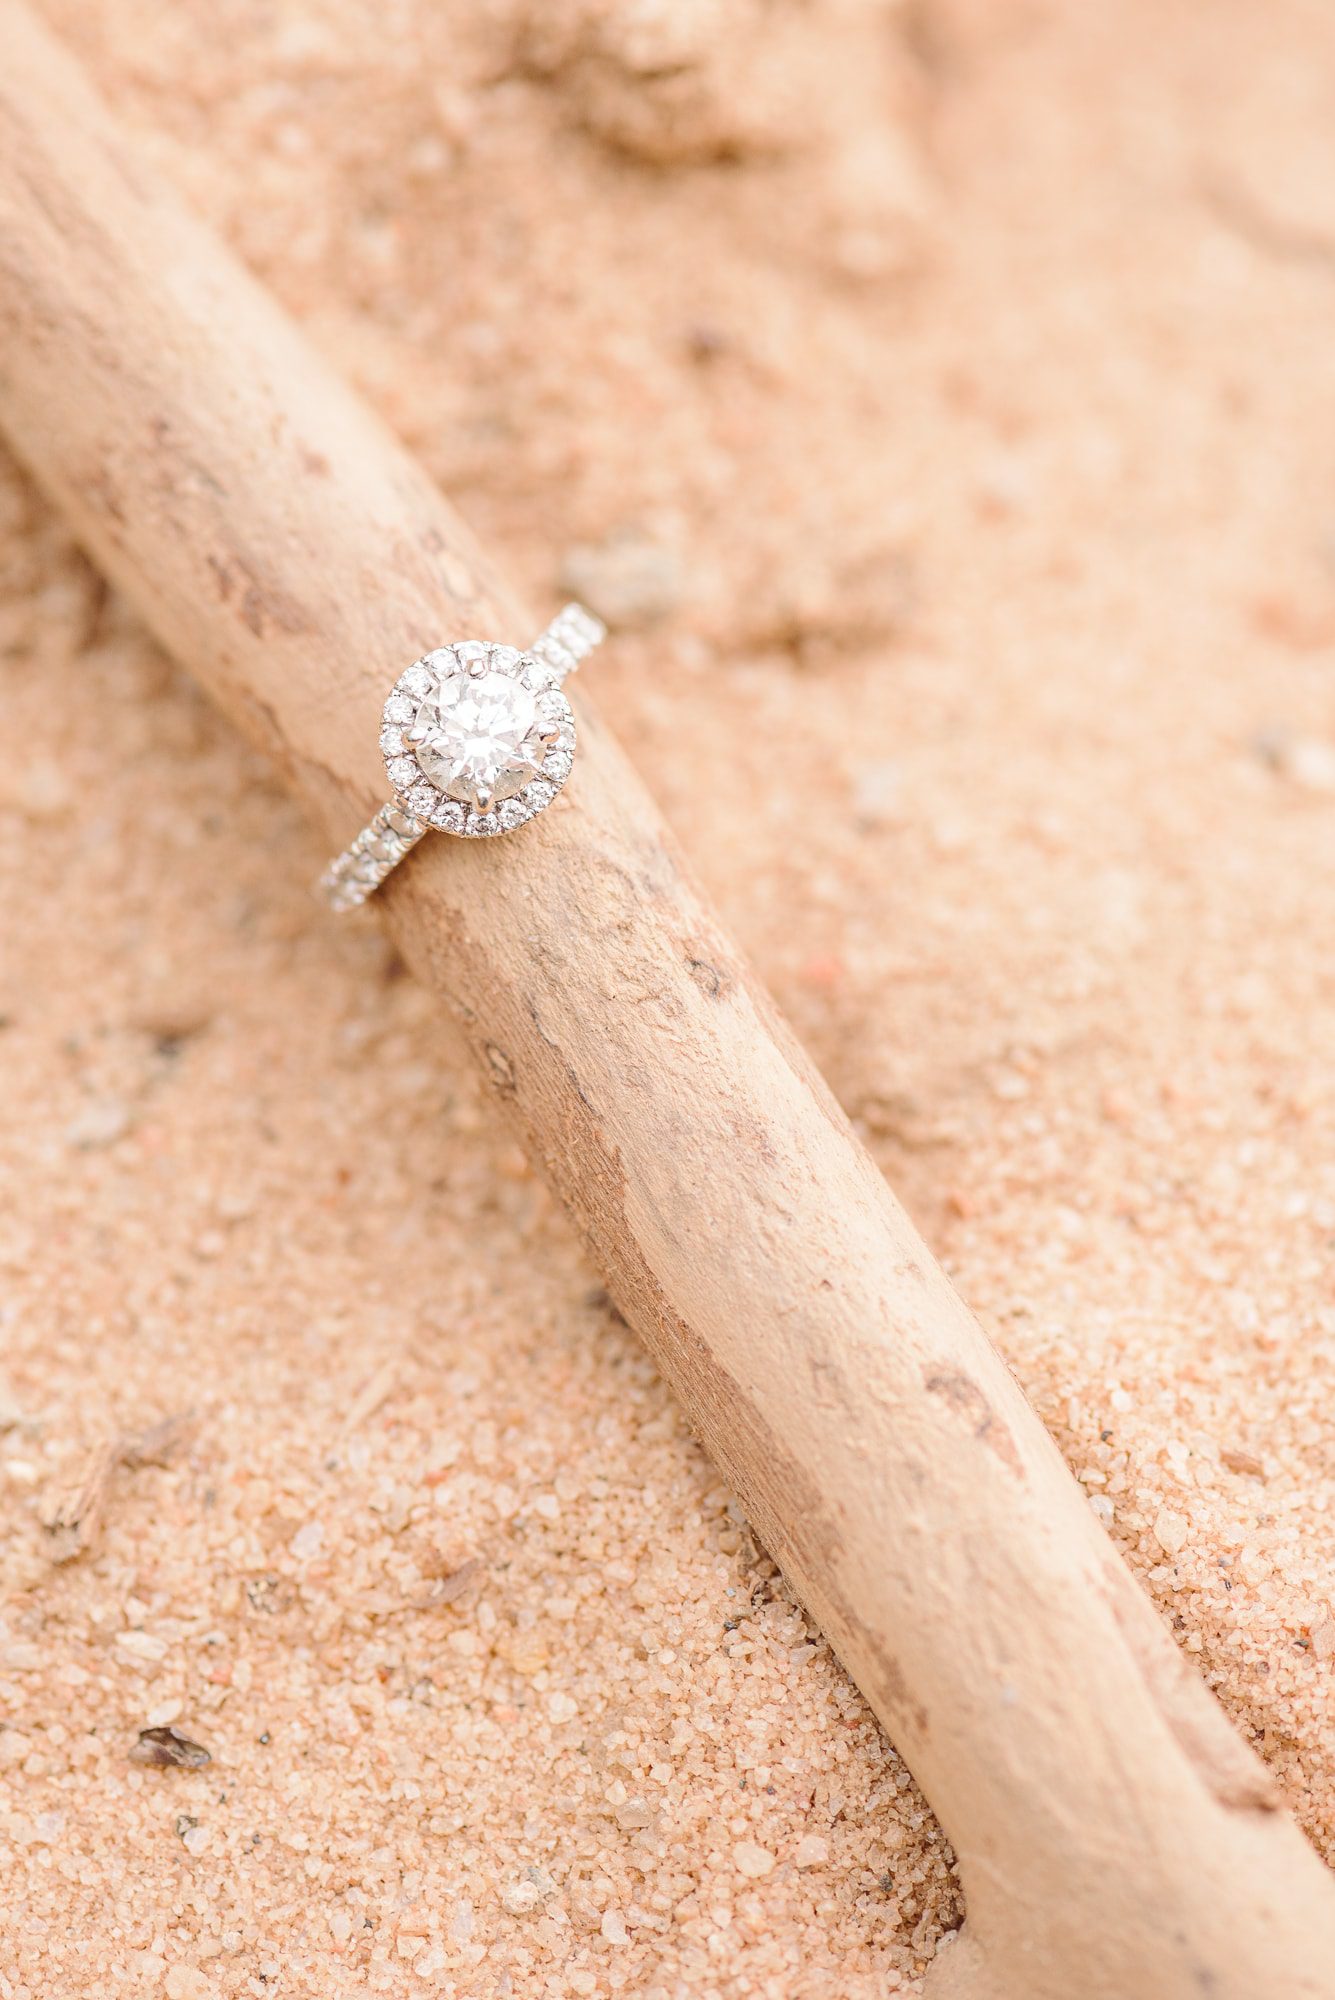 An engagement ring lays in the sand during these Jetton Park engagement photos.